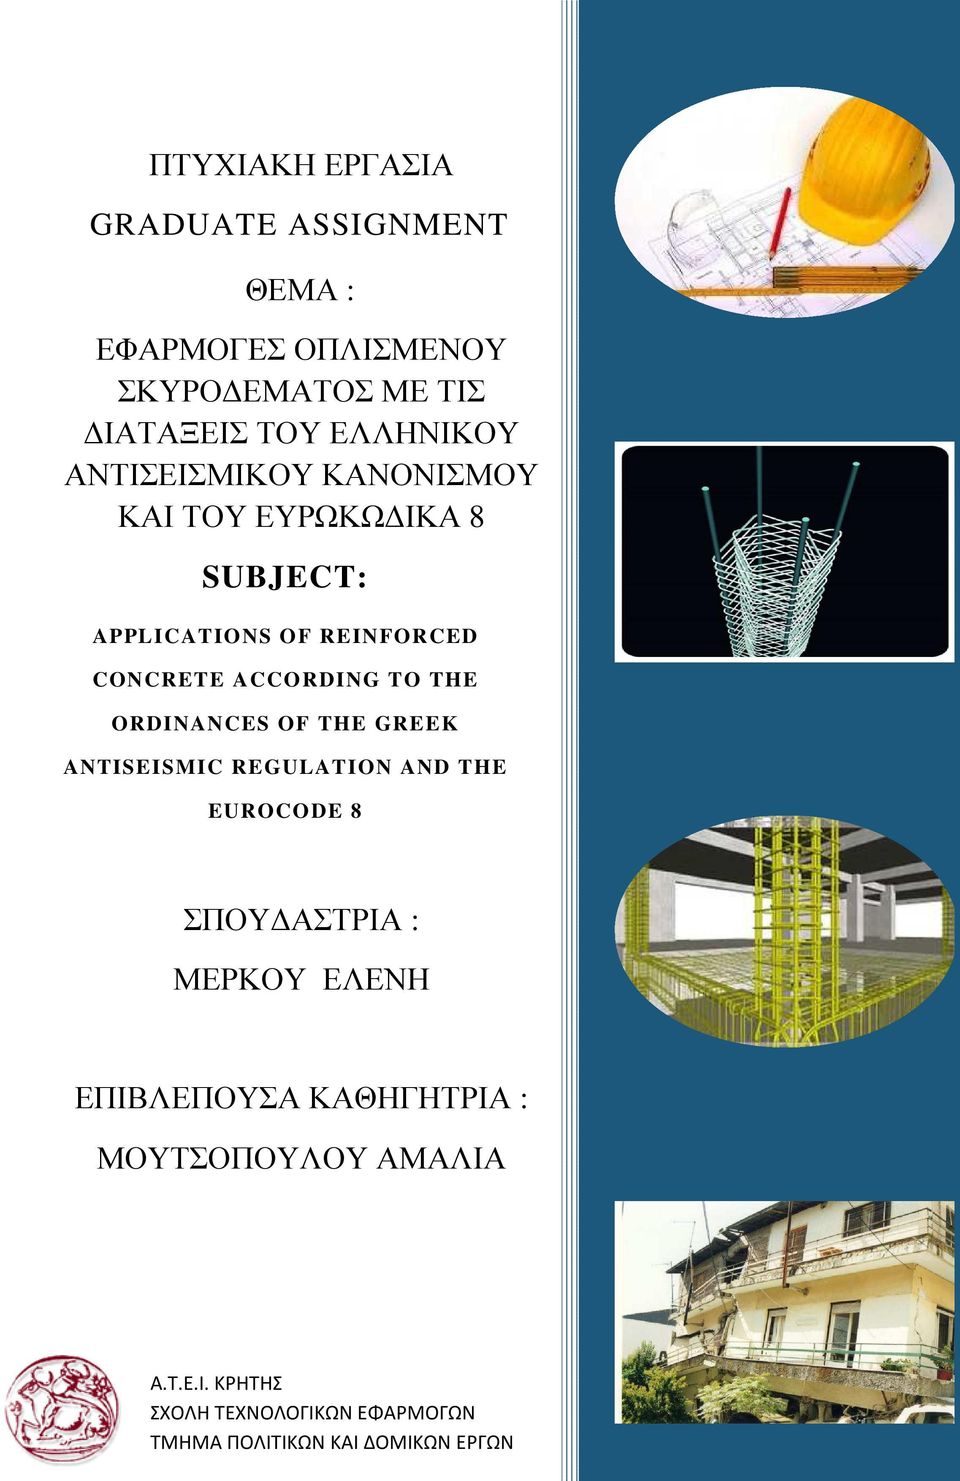 ACCORDING TO THE ORDINANCES OF THE GREEK ANTISEISMIC REGULATION AND THE EUROCODE 8 ΣΠΟΥ ΑΣΤΡΙΑ : ΜΕΡΚΟΥ ΕΛΕΝΗ